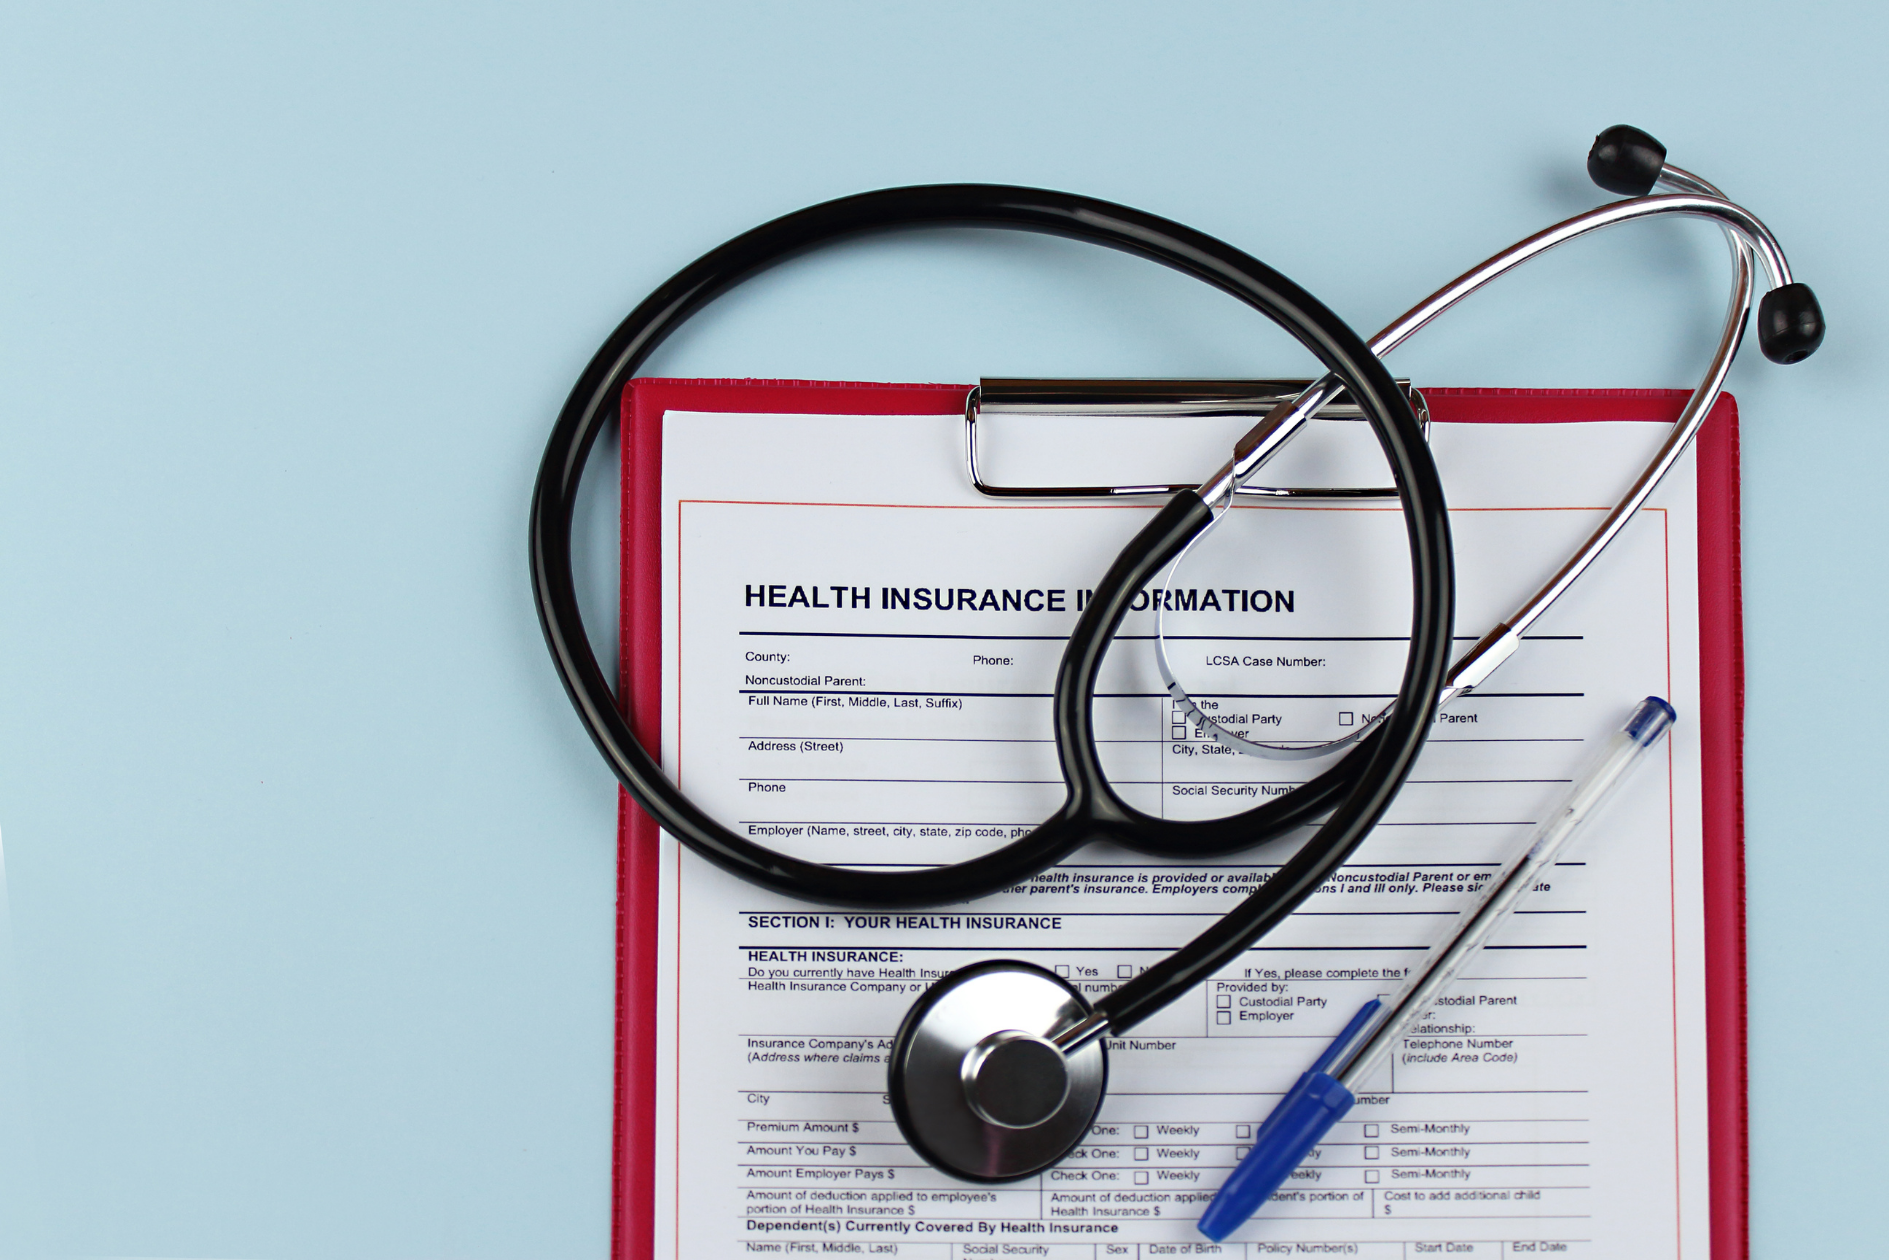 Health Insurance as an Independent Contractor